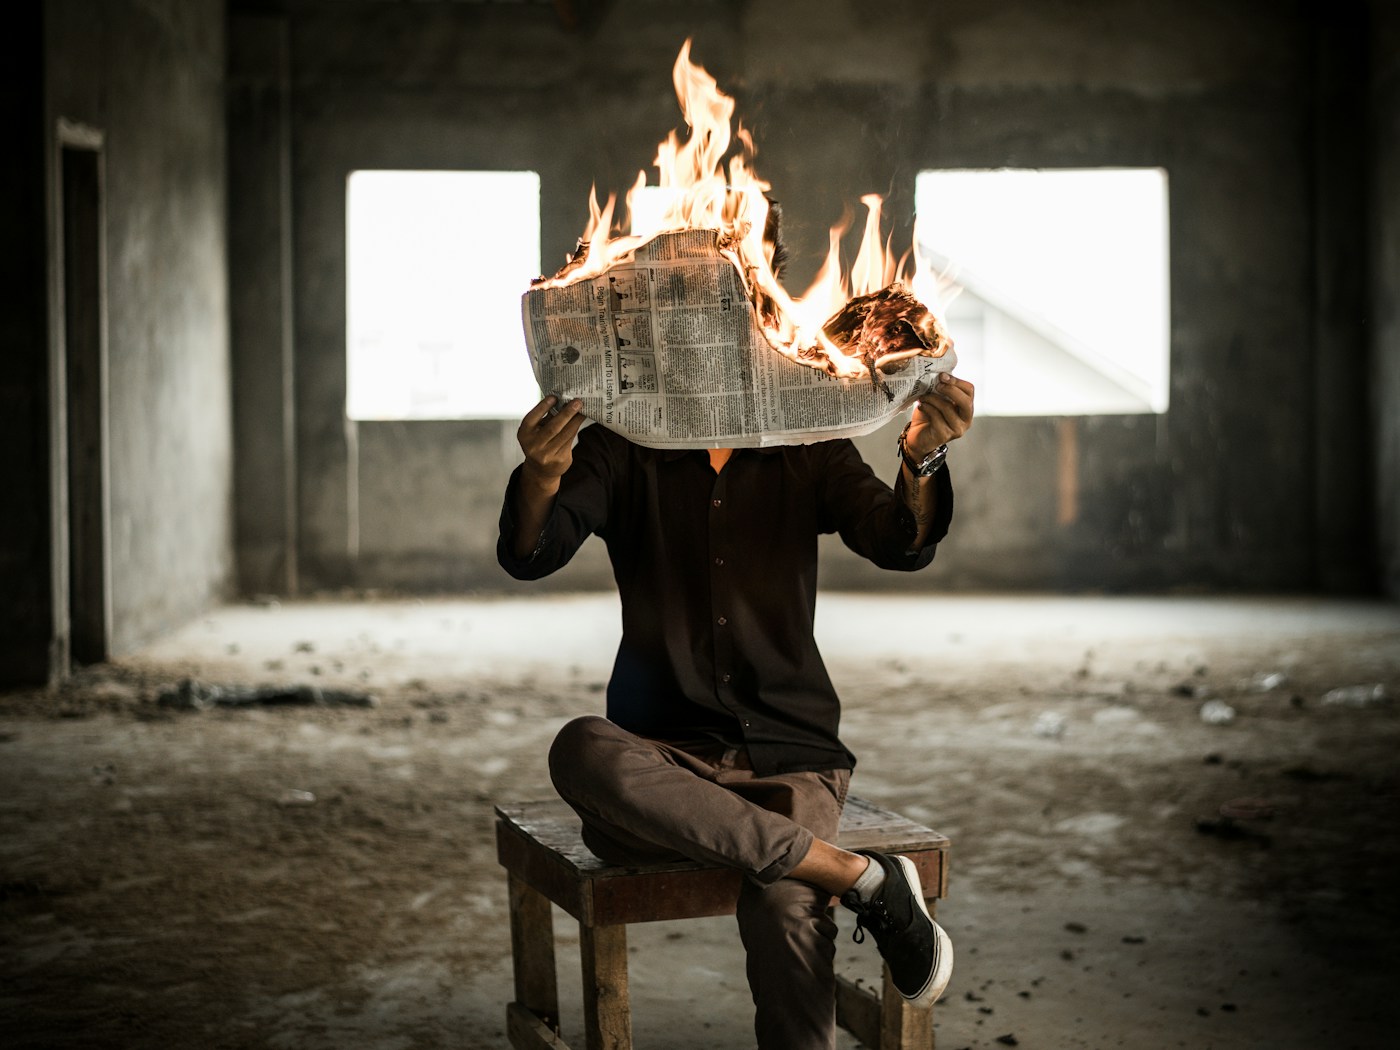 Weekly World News. man sitting on chair holding newspaper on fire